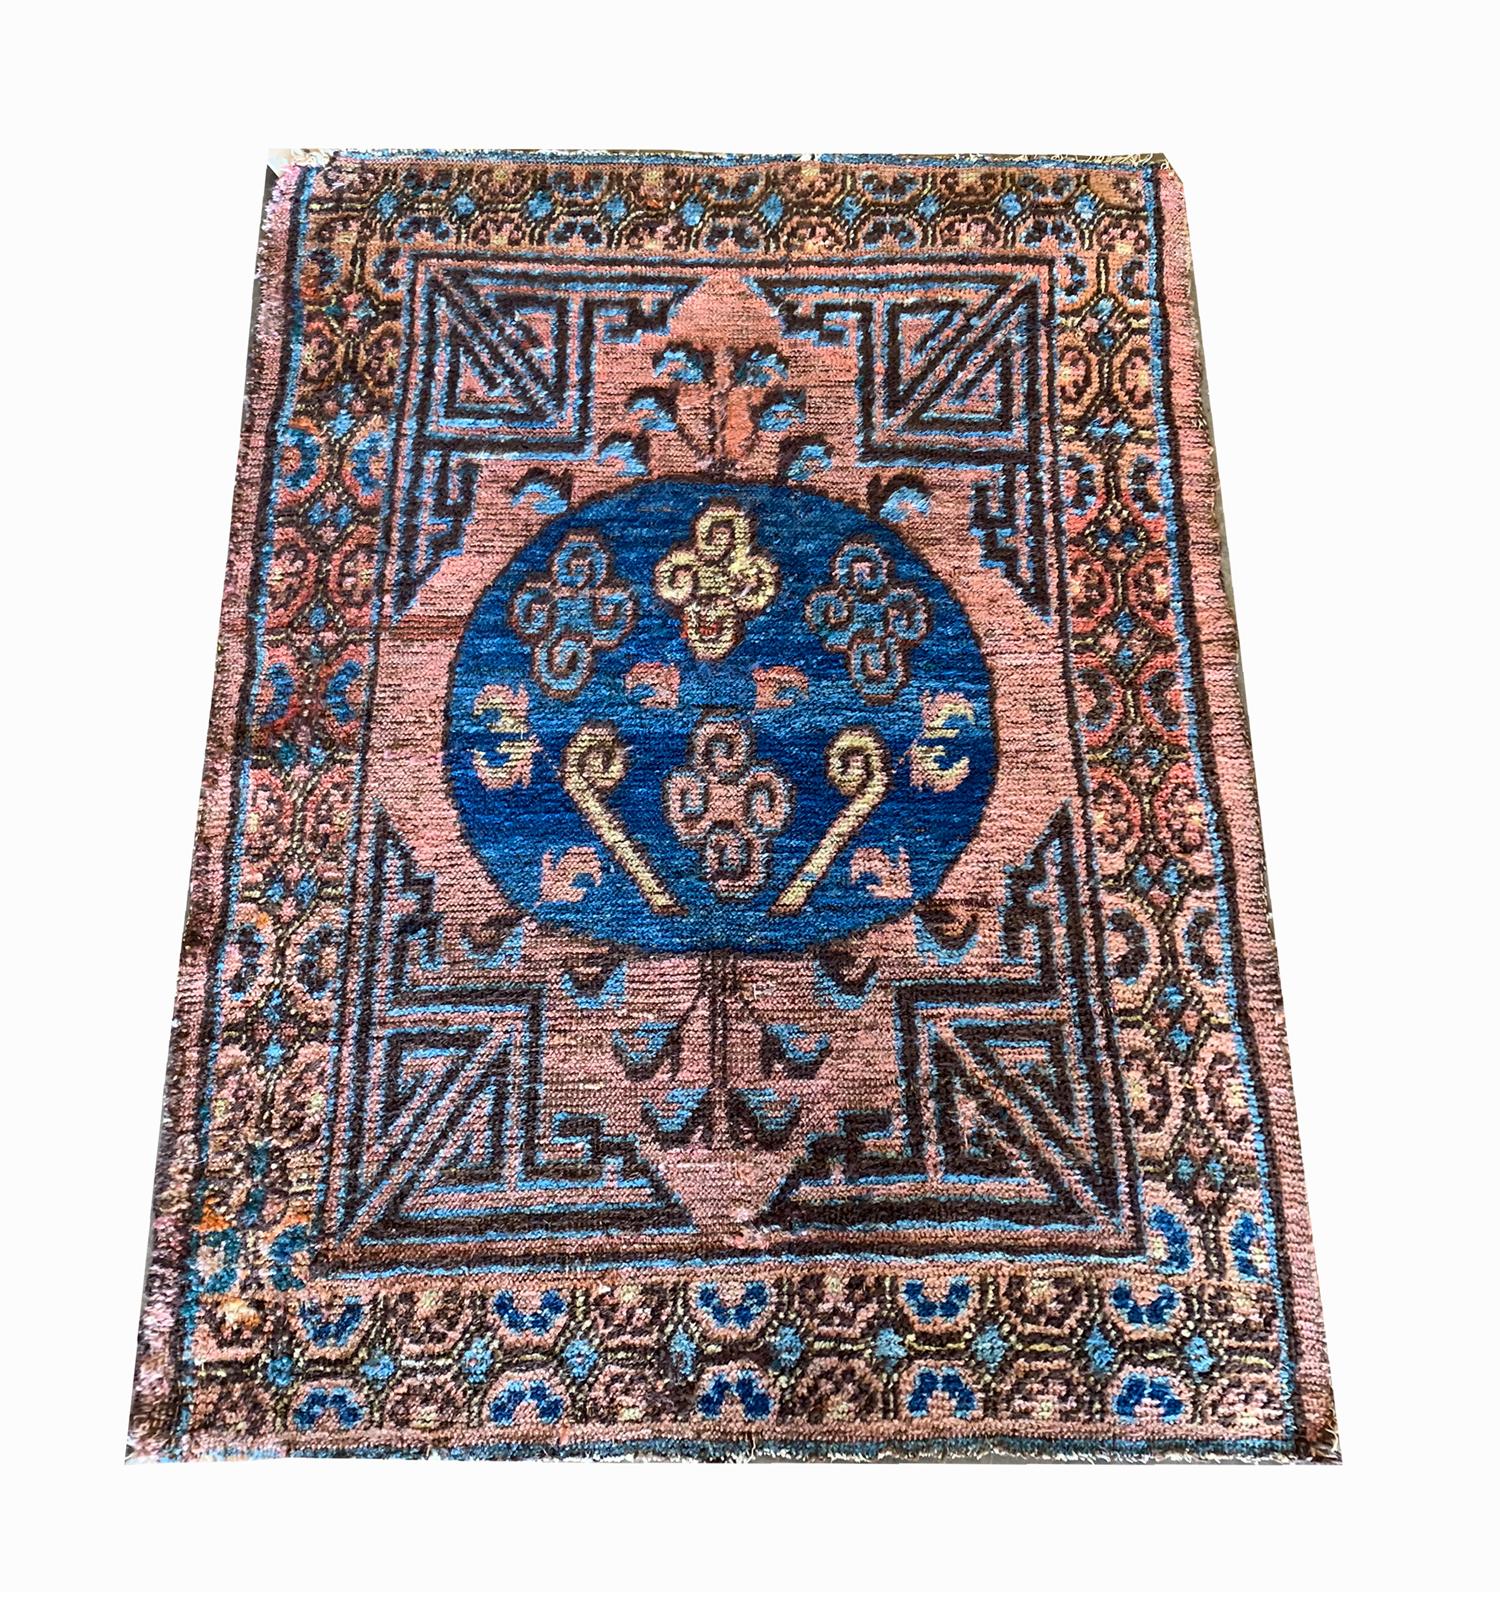 This unique small Kohtan carpet was woven by hand in the 1900s. Khotan rugs were created in East Turkestan in an area that is now Western China. Khotan was once a desert oasis on the silk road and produced bold rugs known for their circular